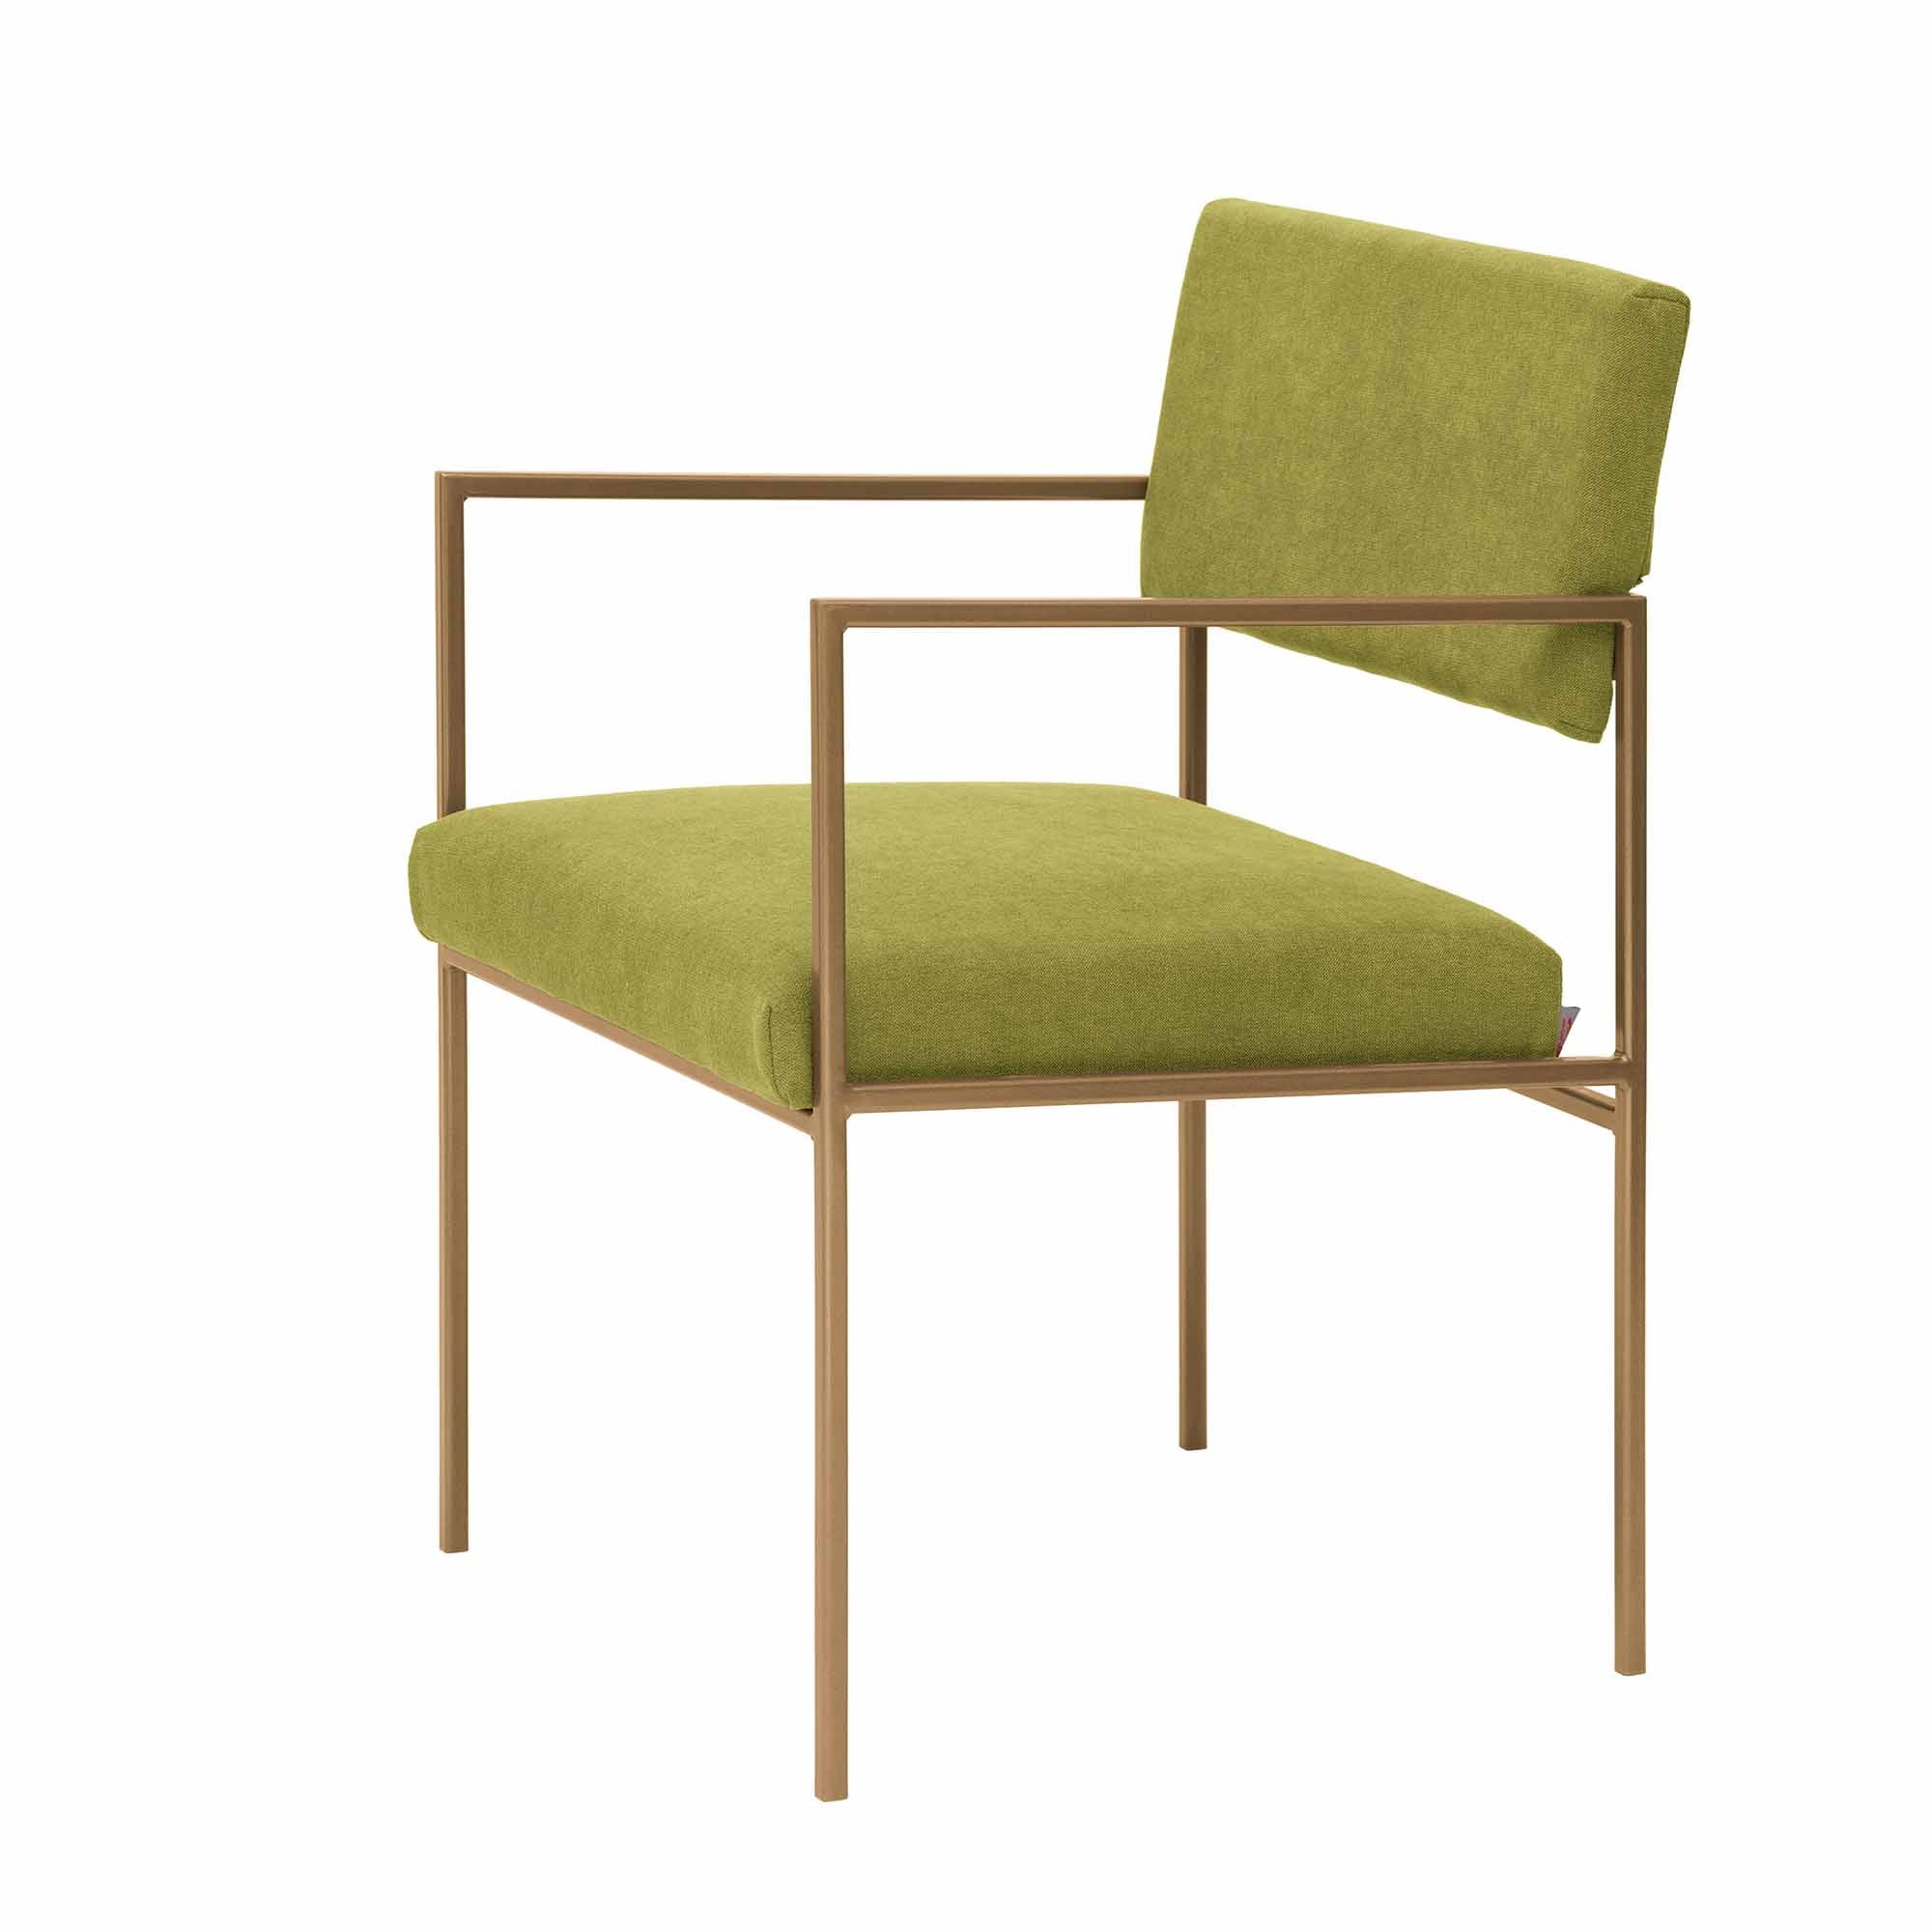 CUBE Armchair, Powder-Coated Steel Frame green fabric, yellow frame, half-side view